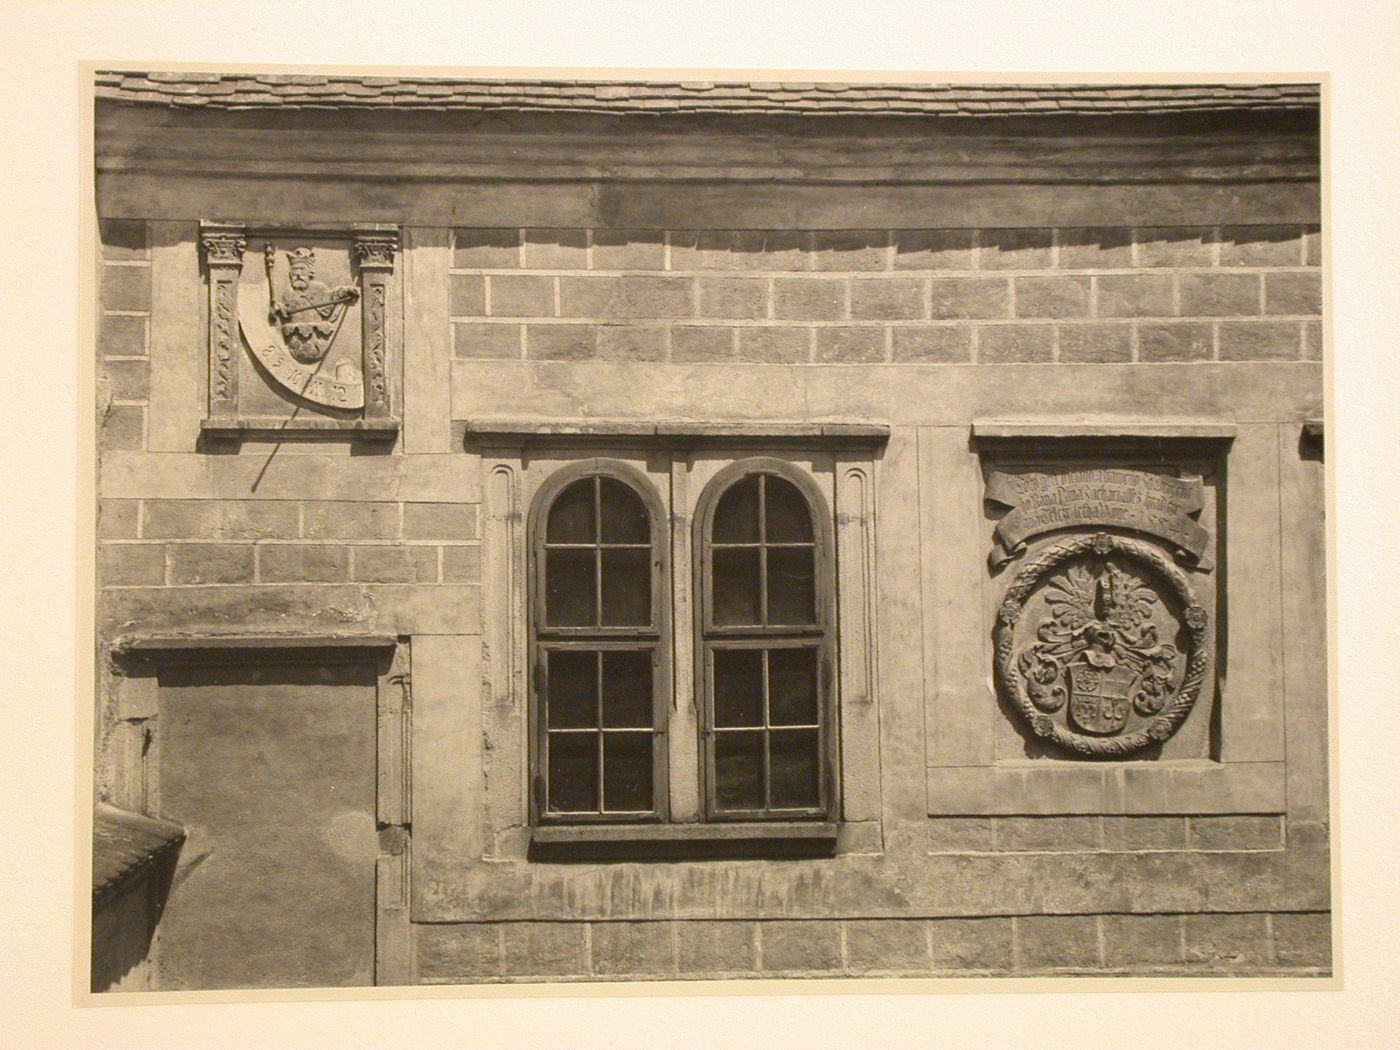 Close-up view of a window and panels with relief carvings showing figures, text and a coat of arms, possibly located in a courtyard of Telc Château, Telc, Czechoslovakia (now Czech Republic)